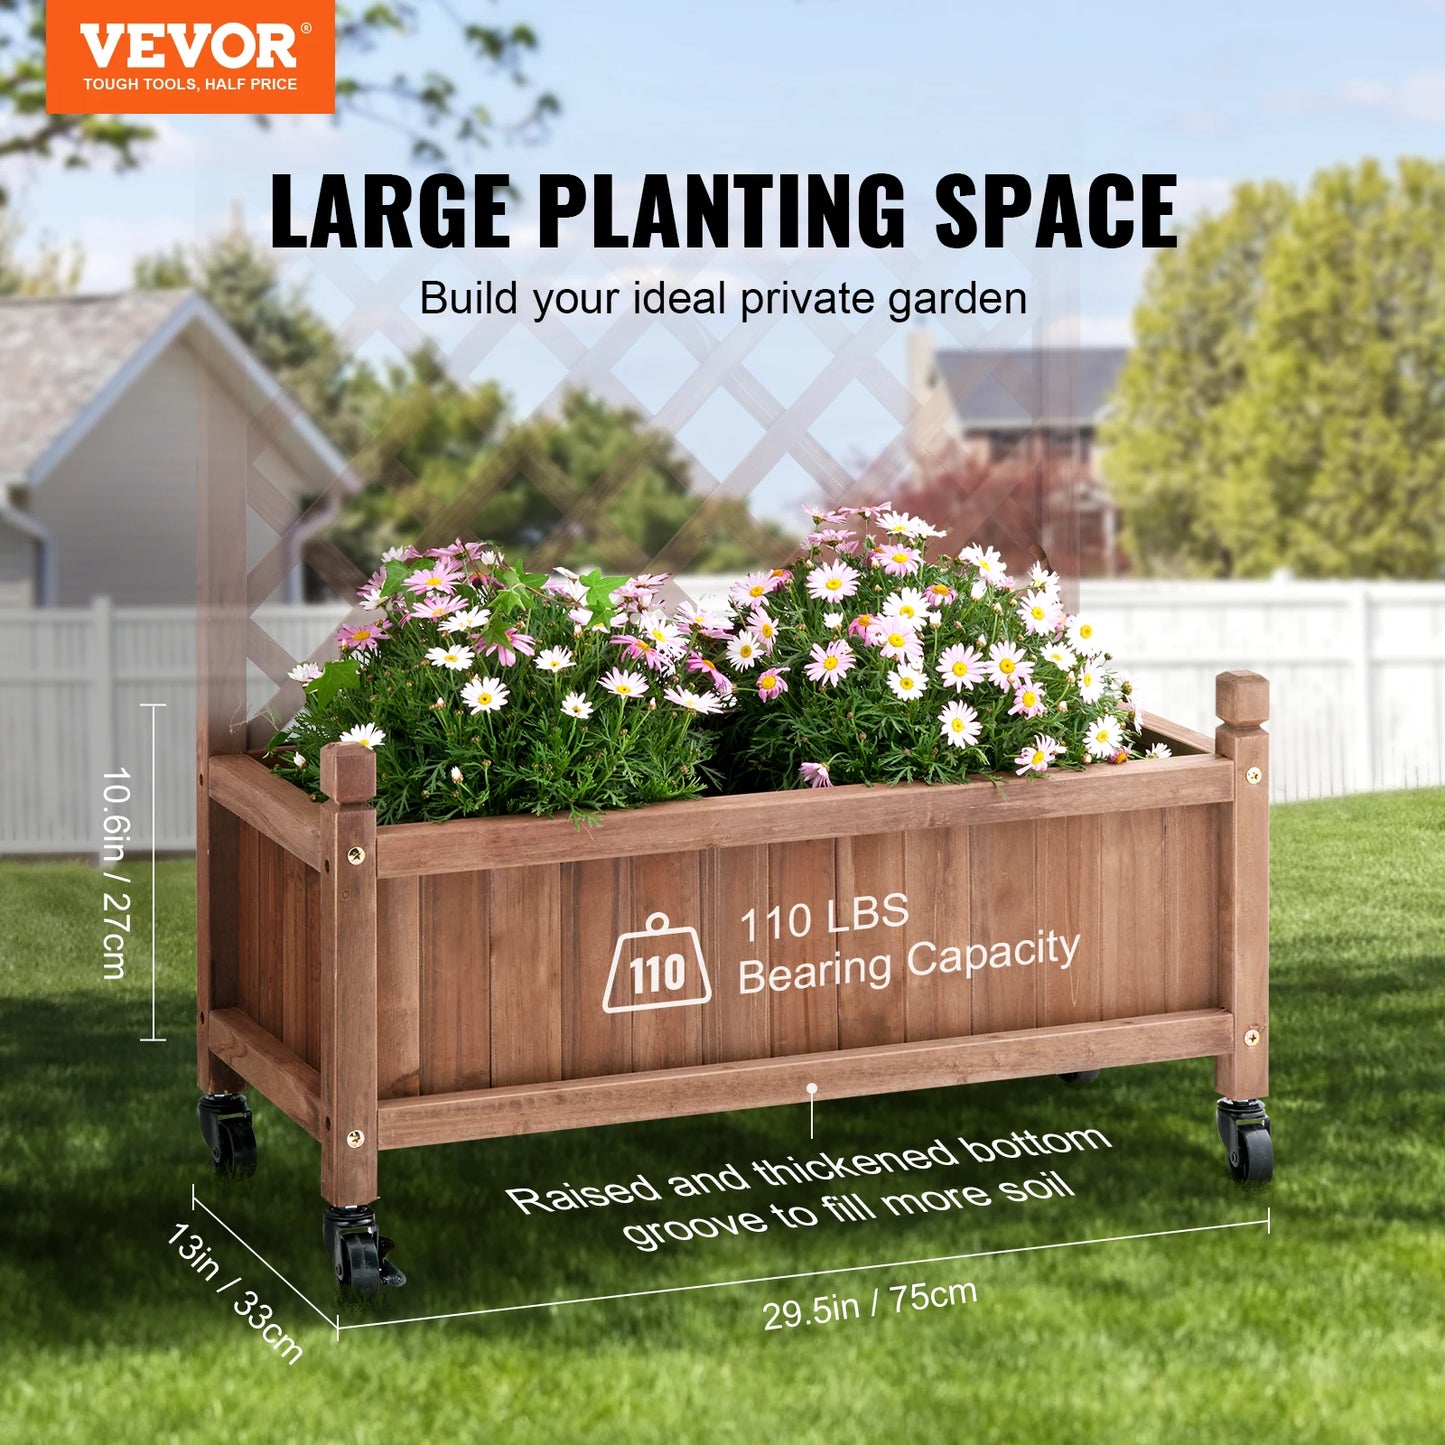 VEVOR 2PCS Wood Planter with Trellis  Outdoor Raised Garden Bed with Drainage Holes for Vine Climbing Plants Flowers in Garden